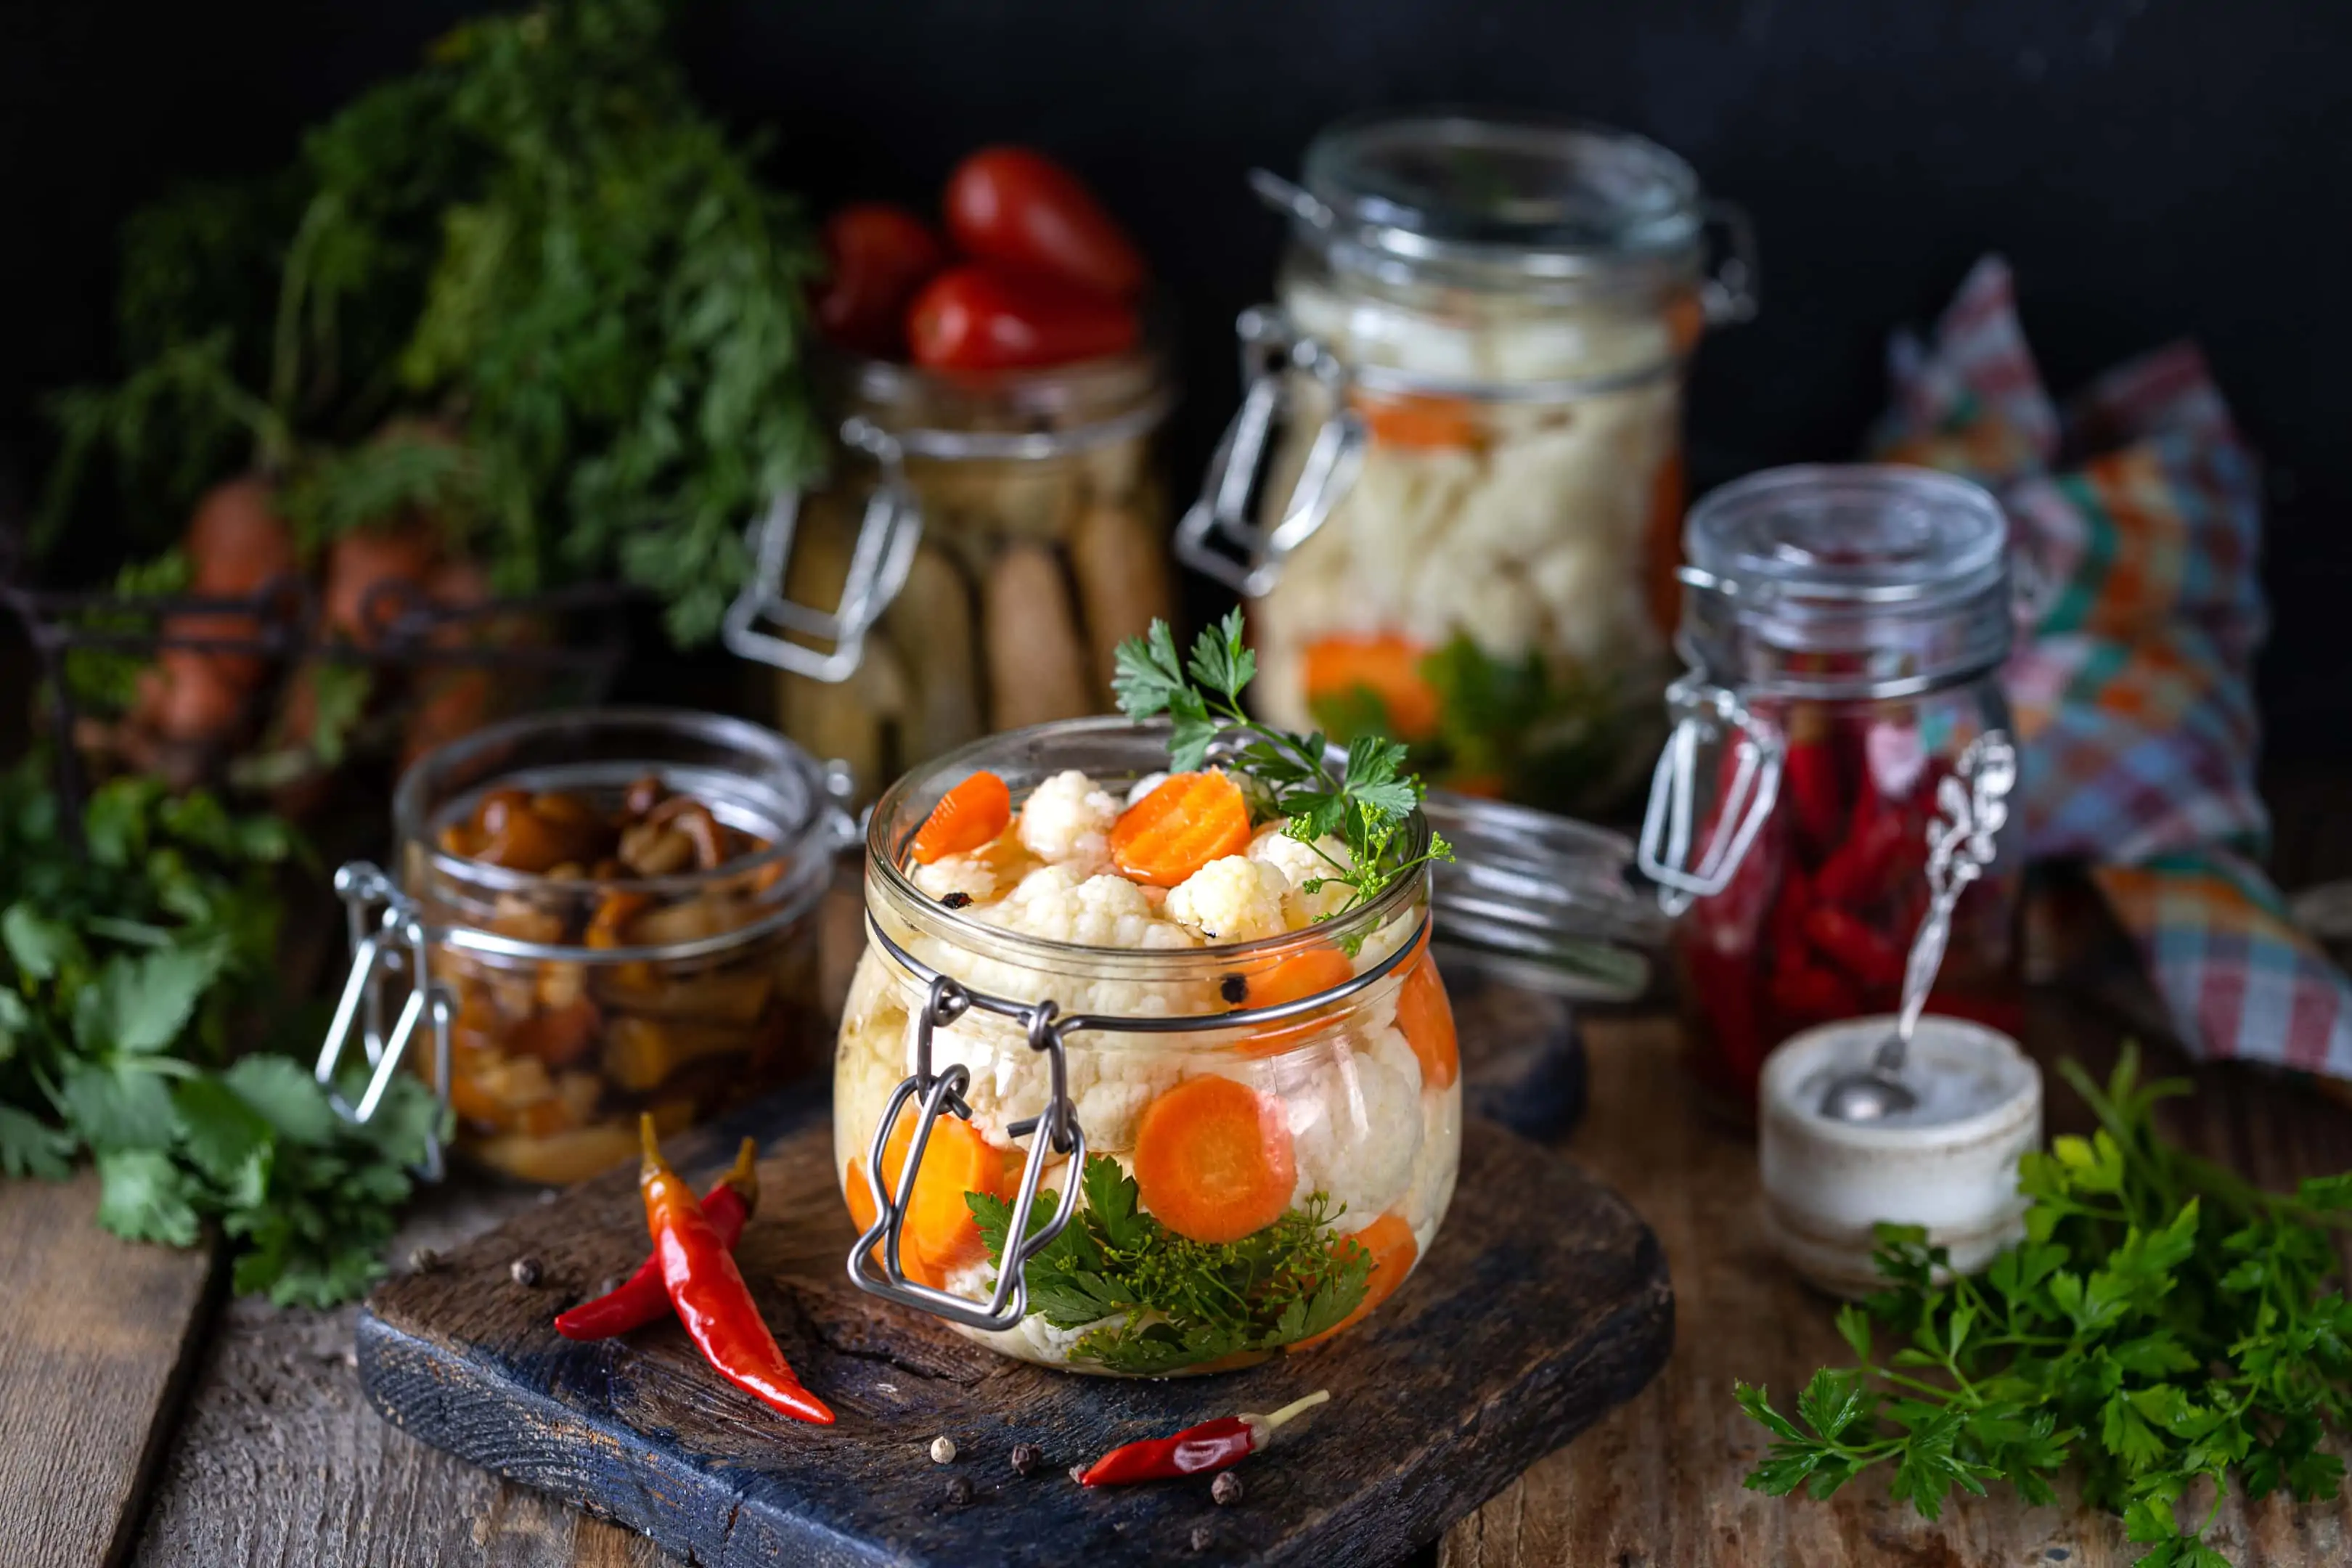 Fermented cauliflower with carrots in a glass jar on wooden table